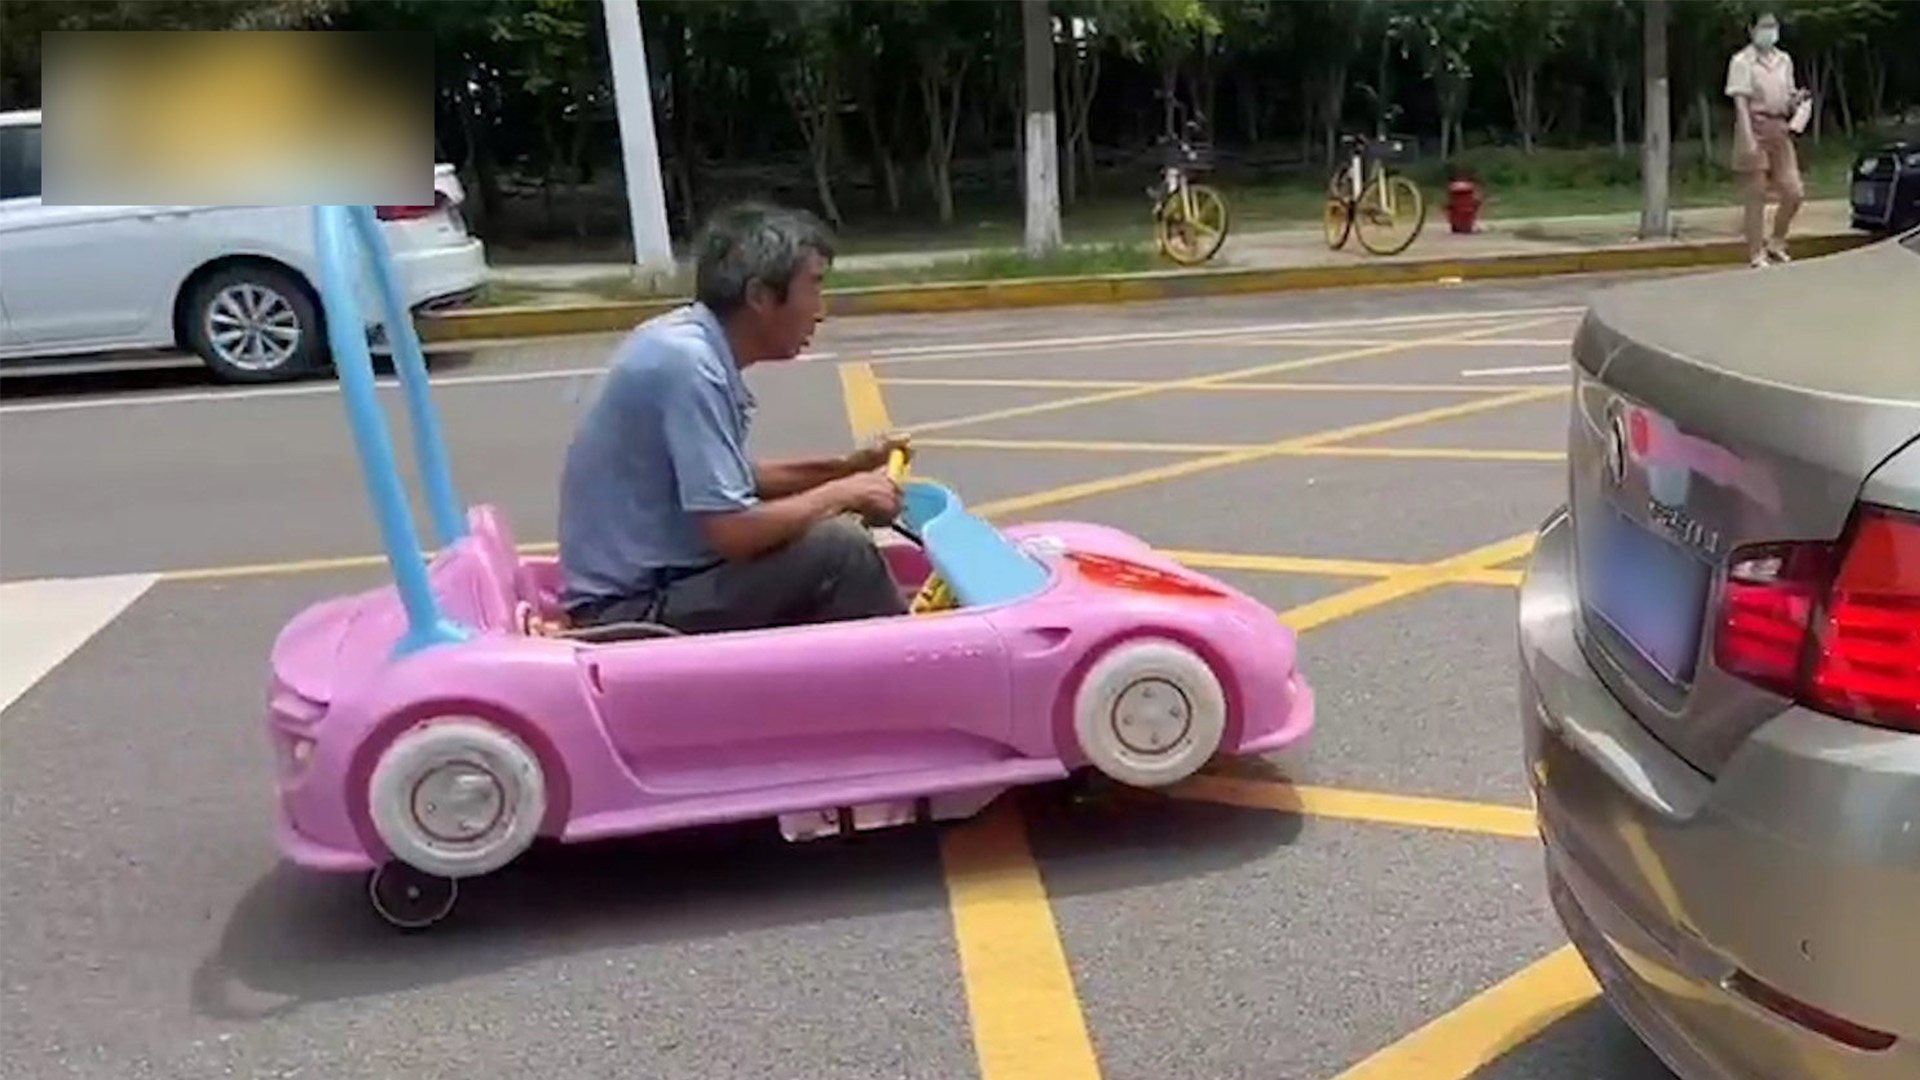 A man in China went viral for driving this “pink car” down a street. Photo: Weibo